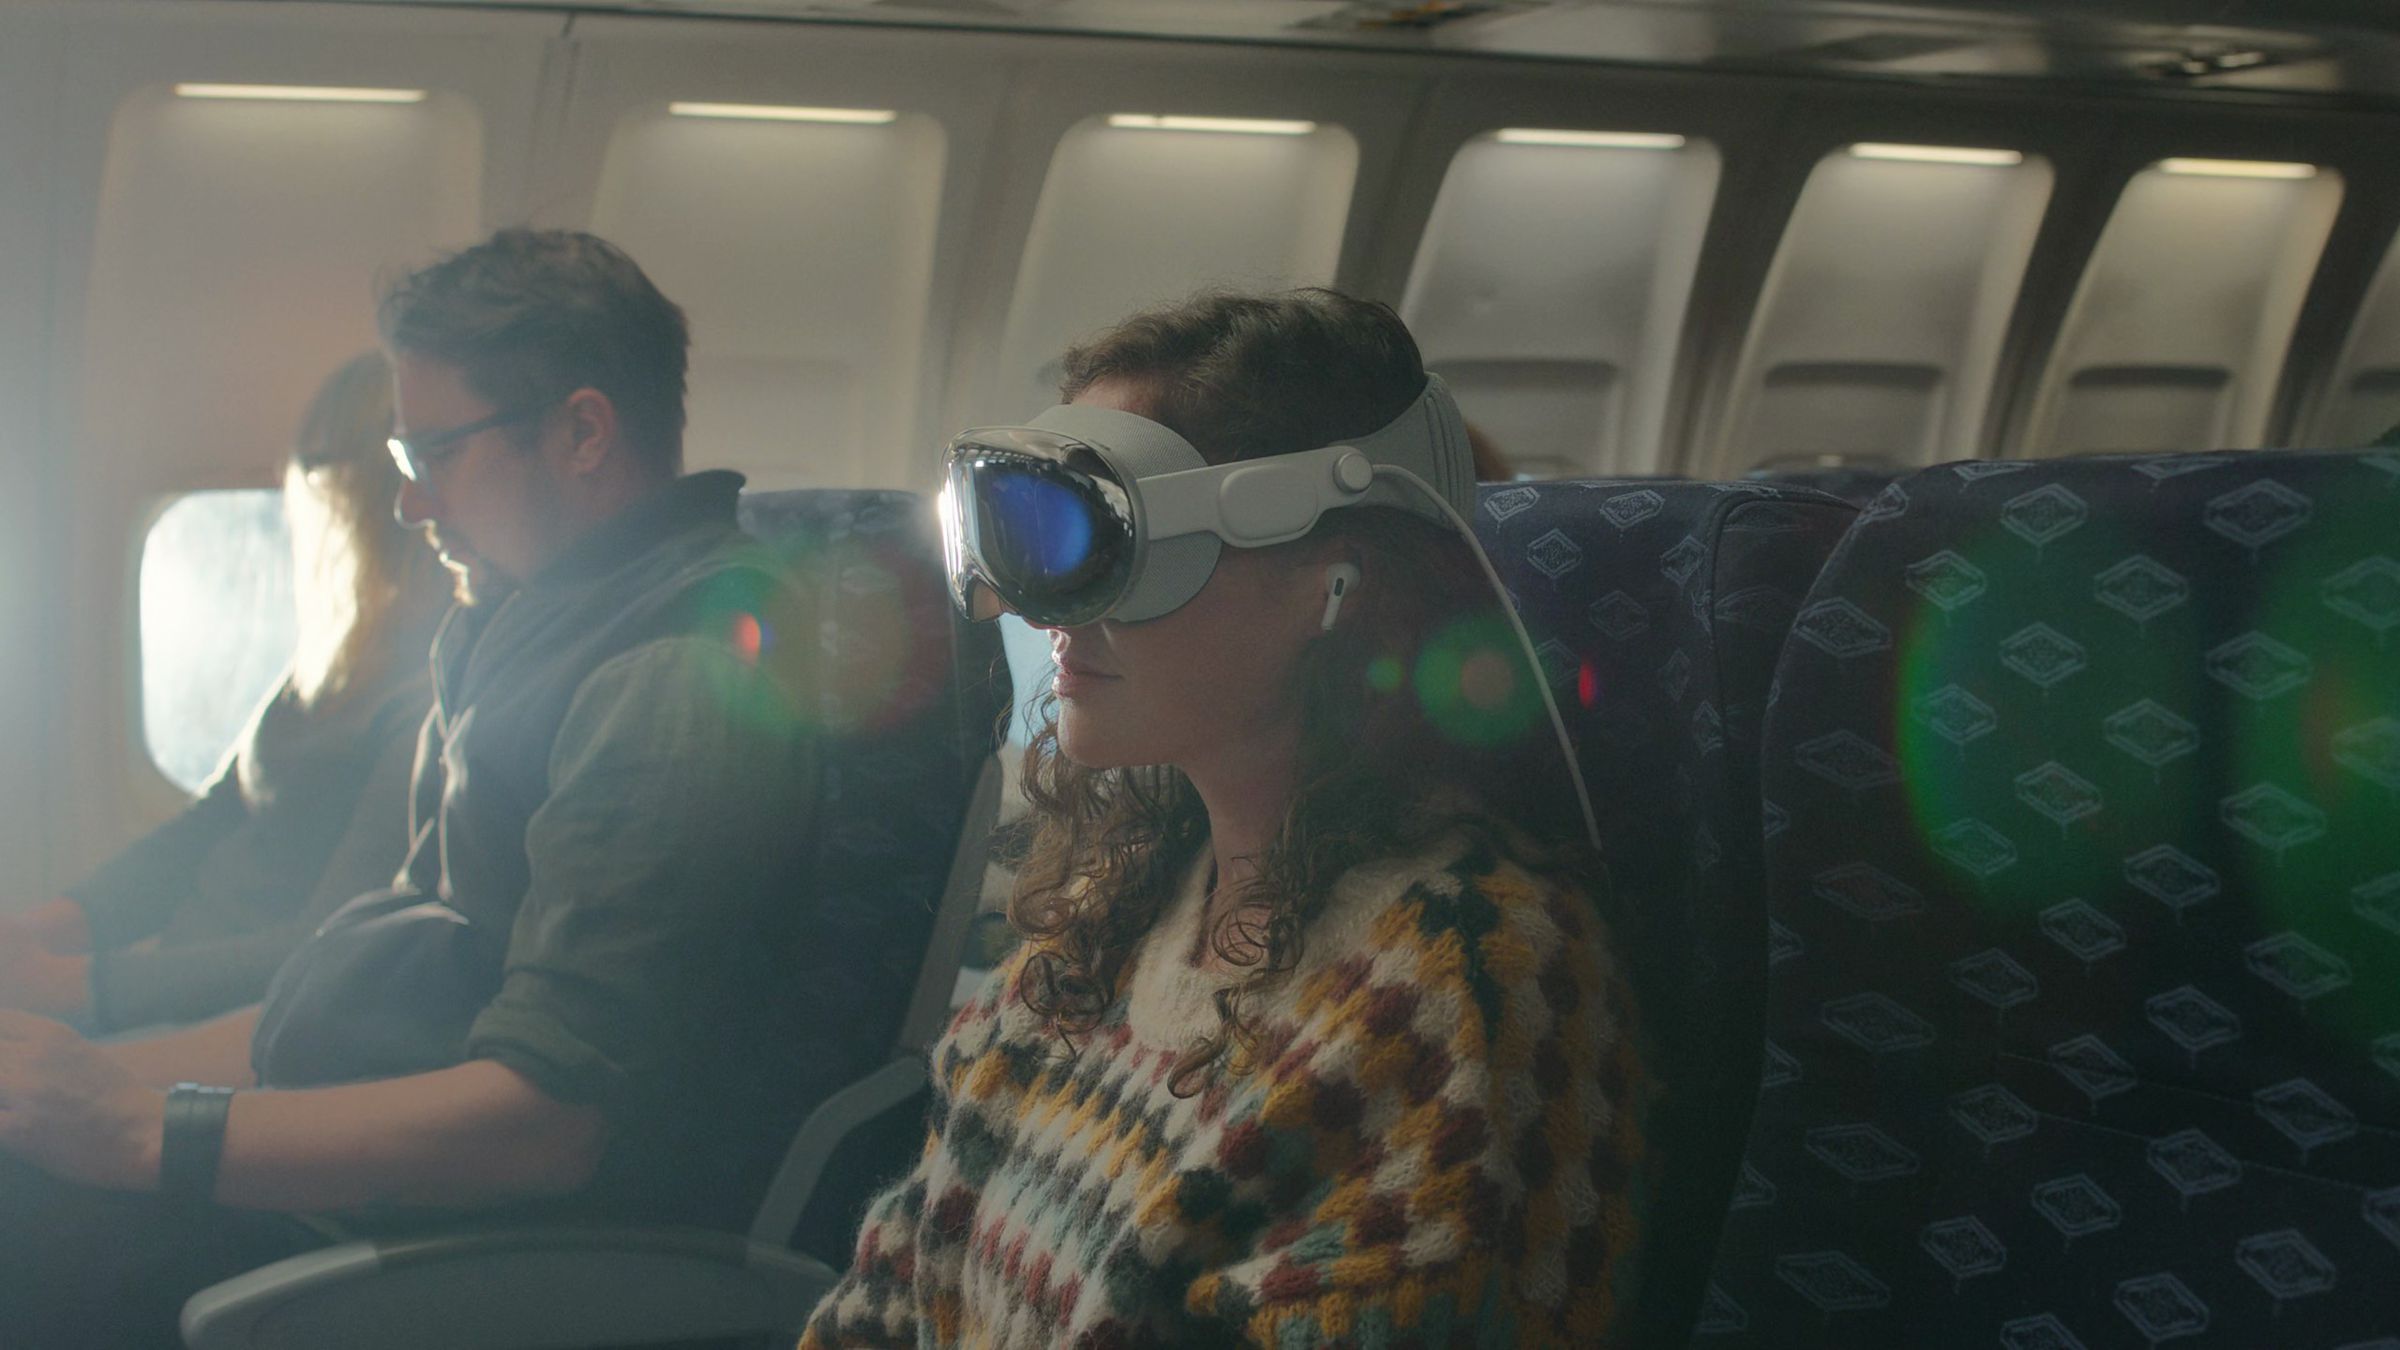 A person wearing a Vision Pro headset while on a plane